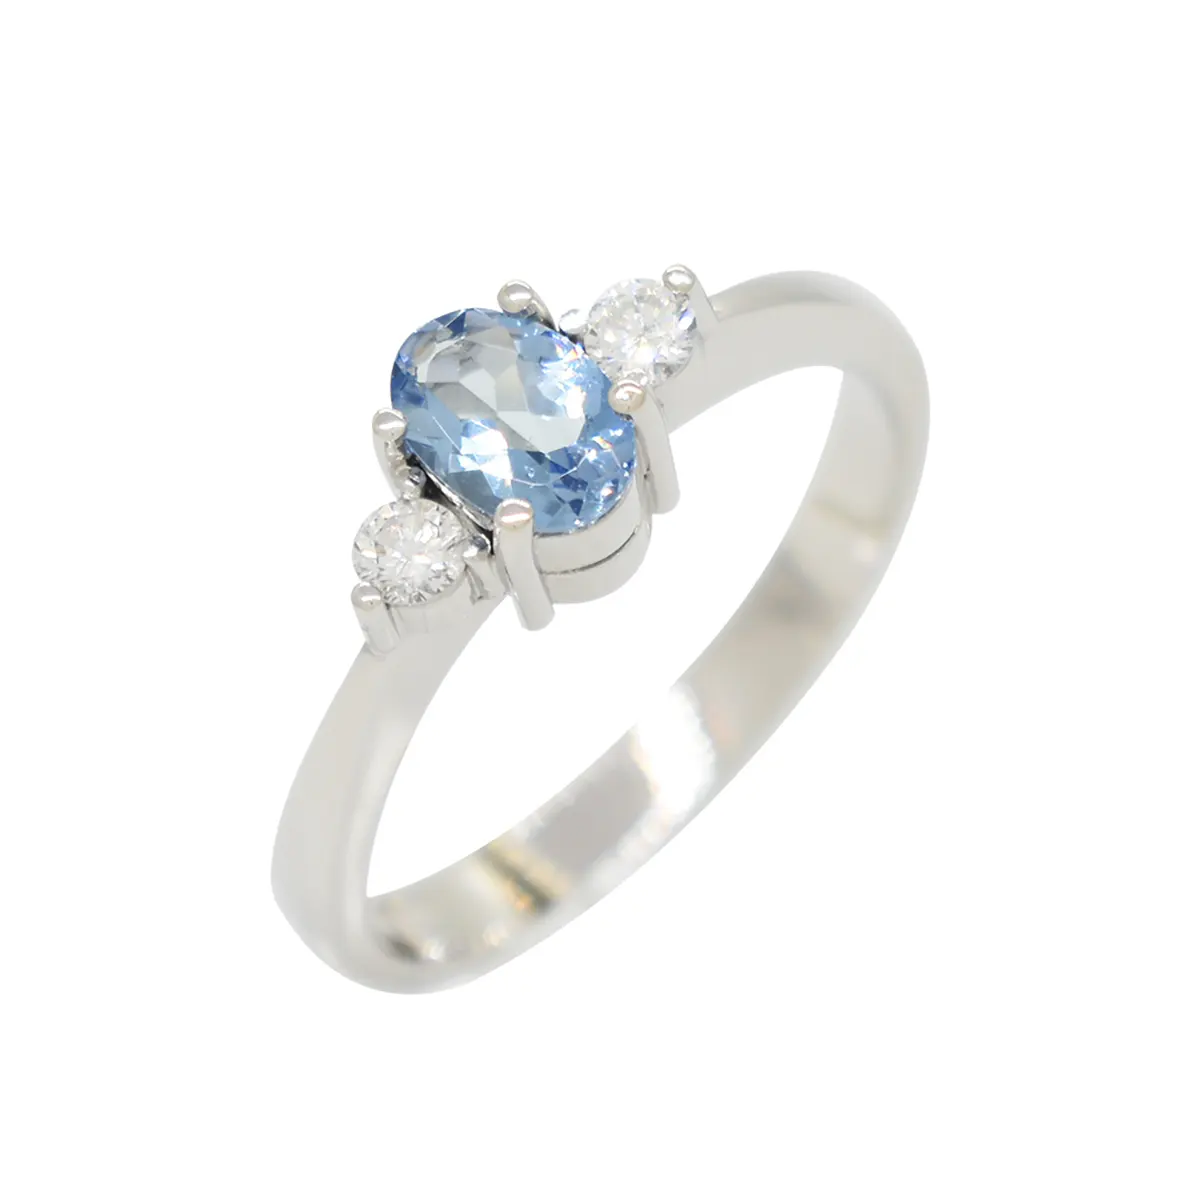 Small 3 stones ring with genuine oval shape natural aquamarine in 0.38 Ct. in the middle of 2 round cut diamonds in 0.12 Ct. total weight